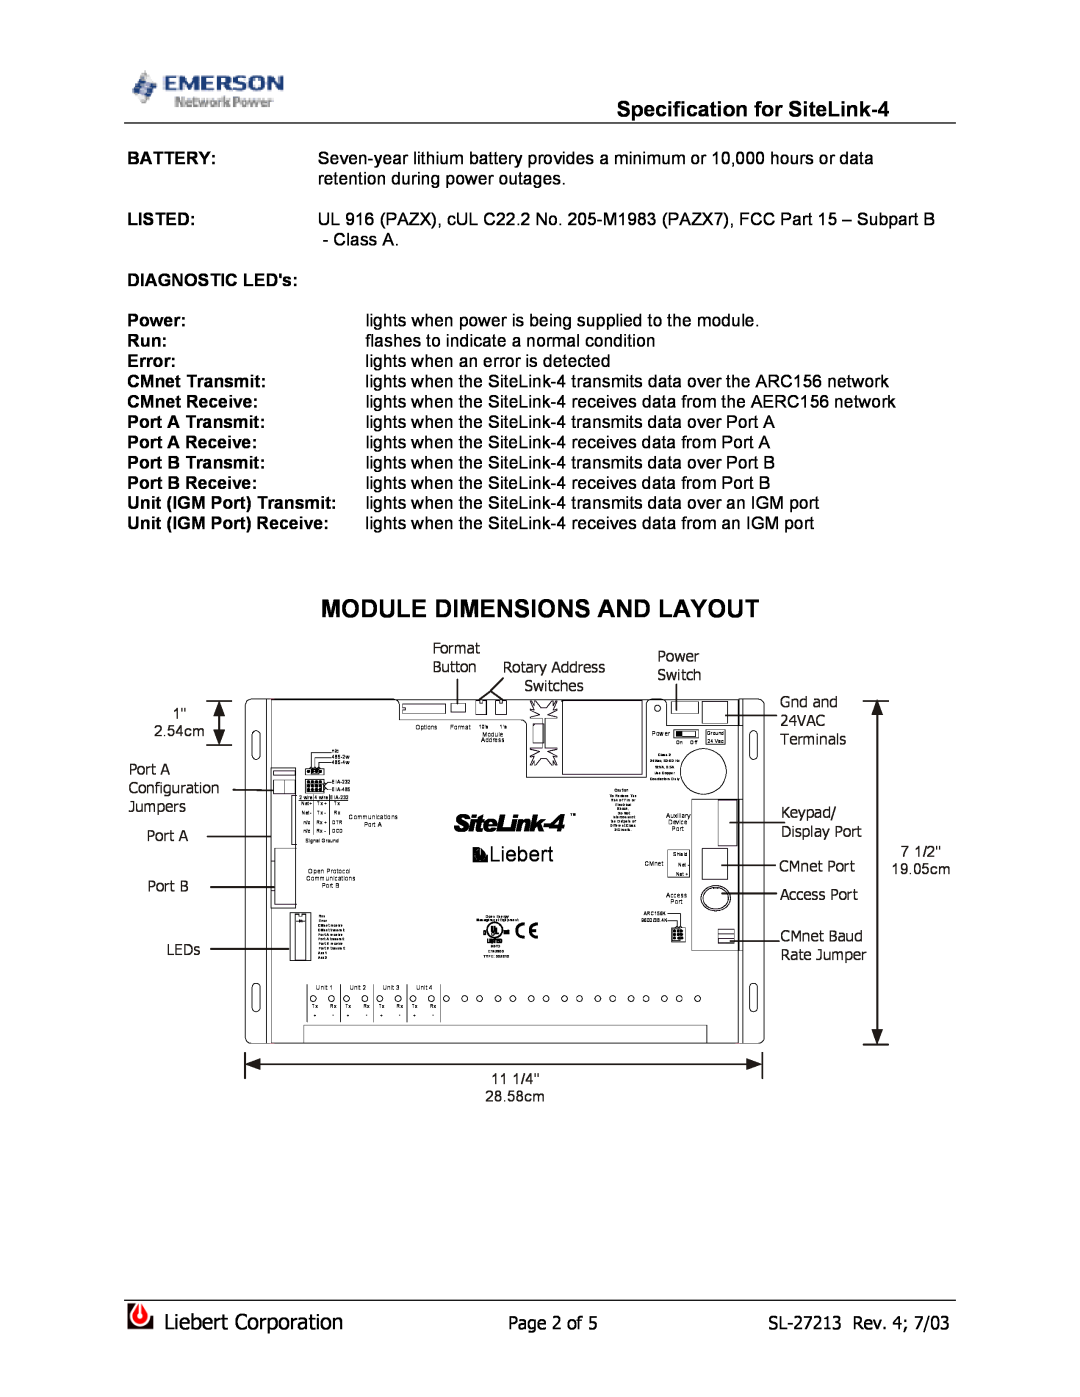 Emerson dimensions Module Dimensions And Layout, Specification for SiteLink-4, Liebert Corporation 